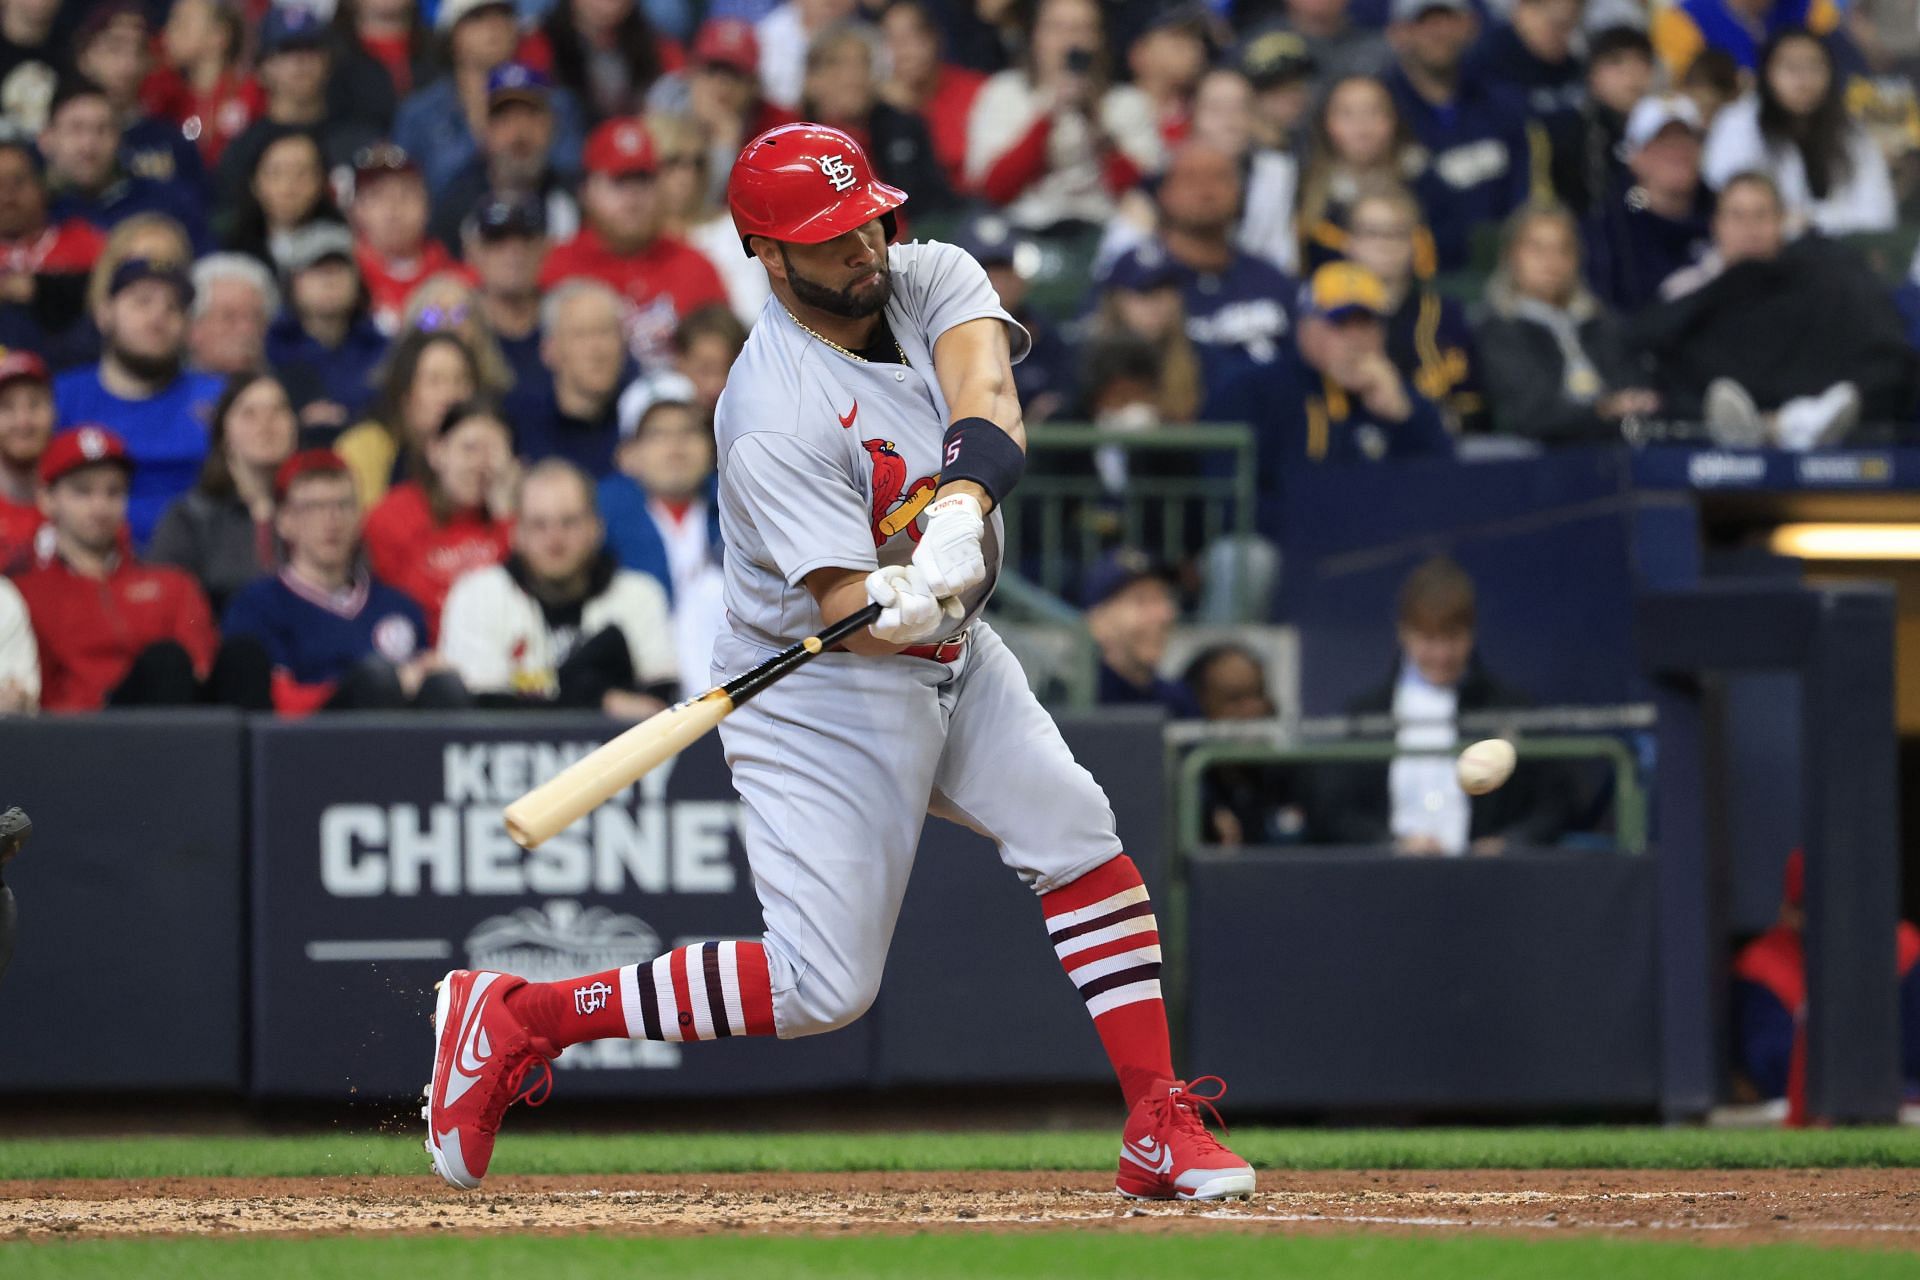 Albert Pujols of the St. Louis Cardinals bats in a game against the Milwaukee Brewers